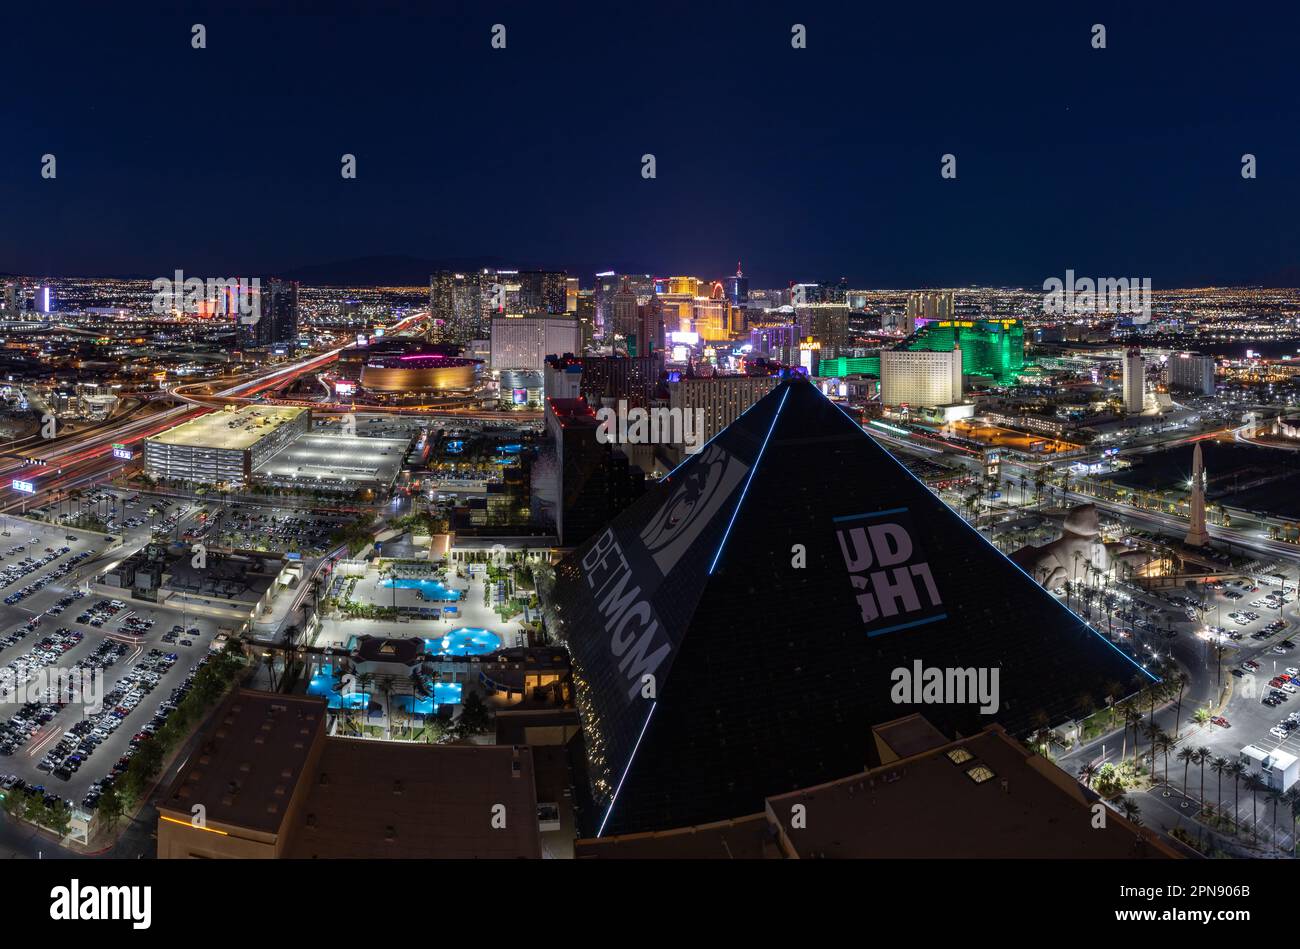 A picture of Las Vegas at night, with the Strip at the far center and the Luxor Hotel and Casino pyramid on the bottom. Stock Photo